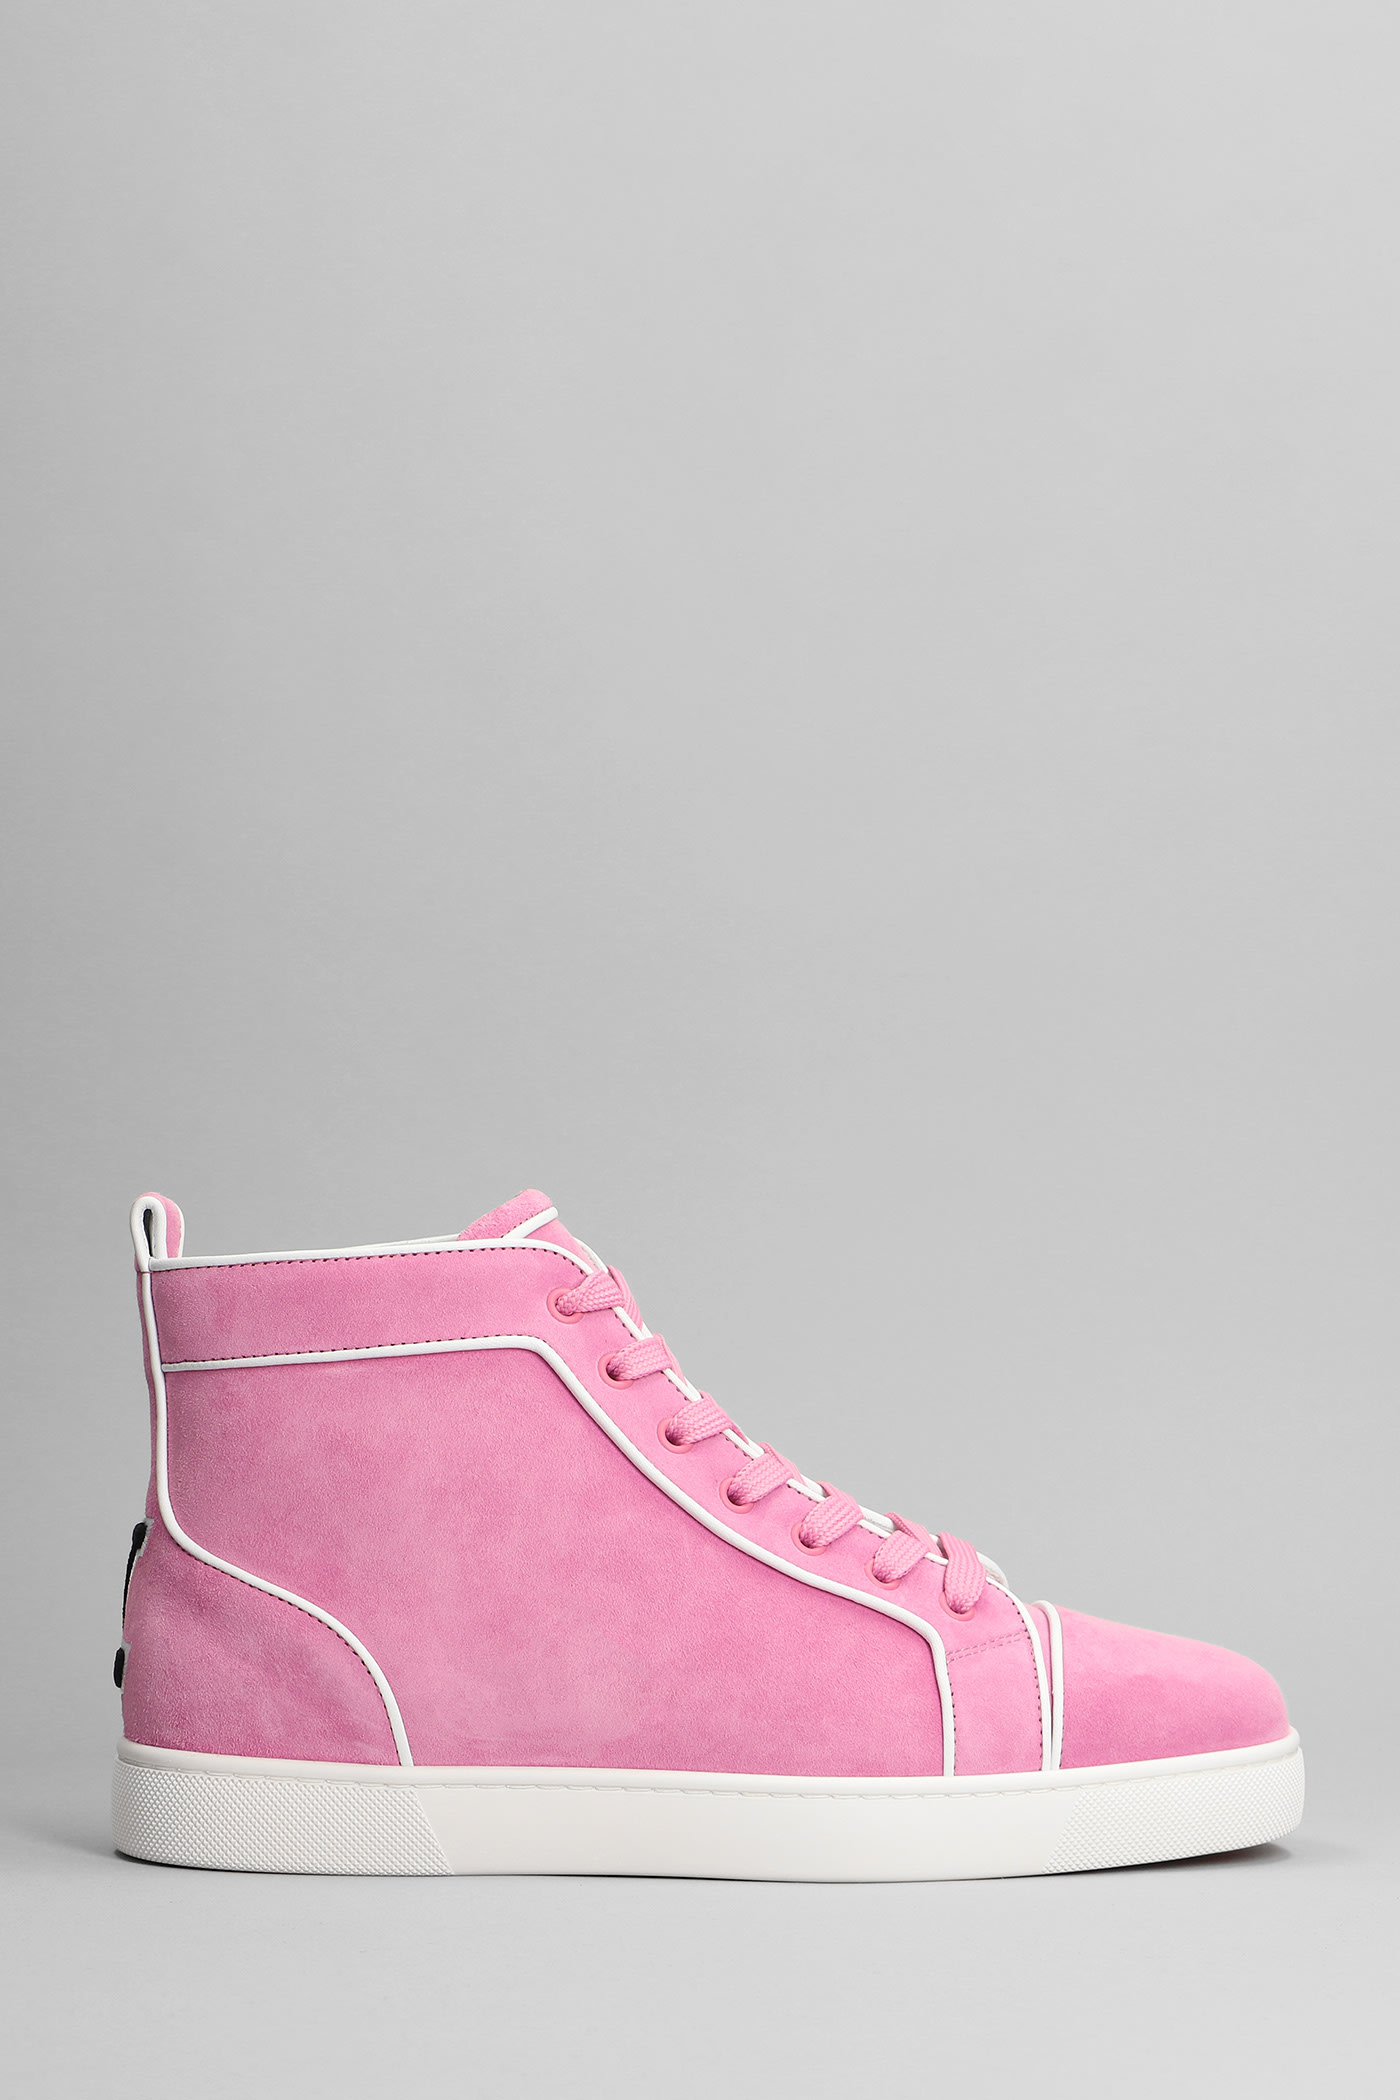 Christian Louboutin Varsilouis Flat Trainers In Rose-pink Suede